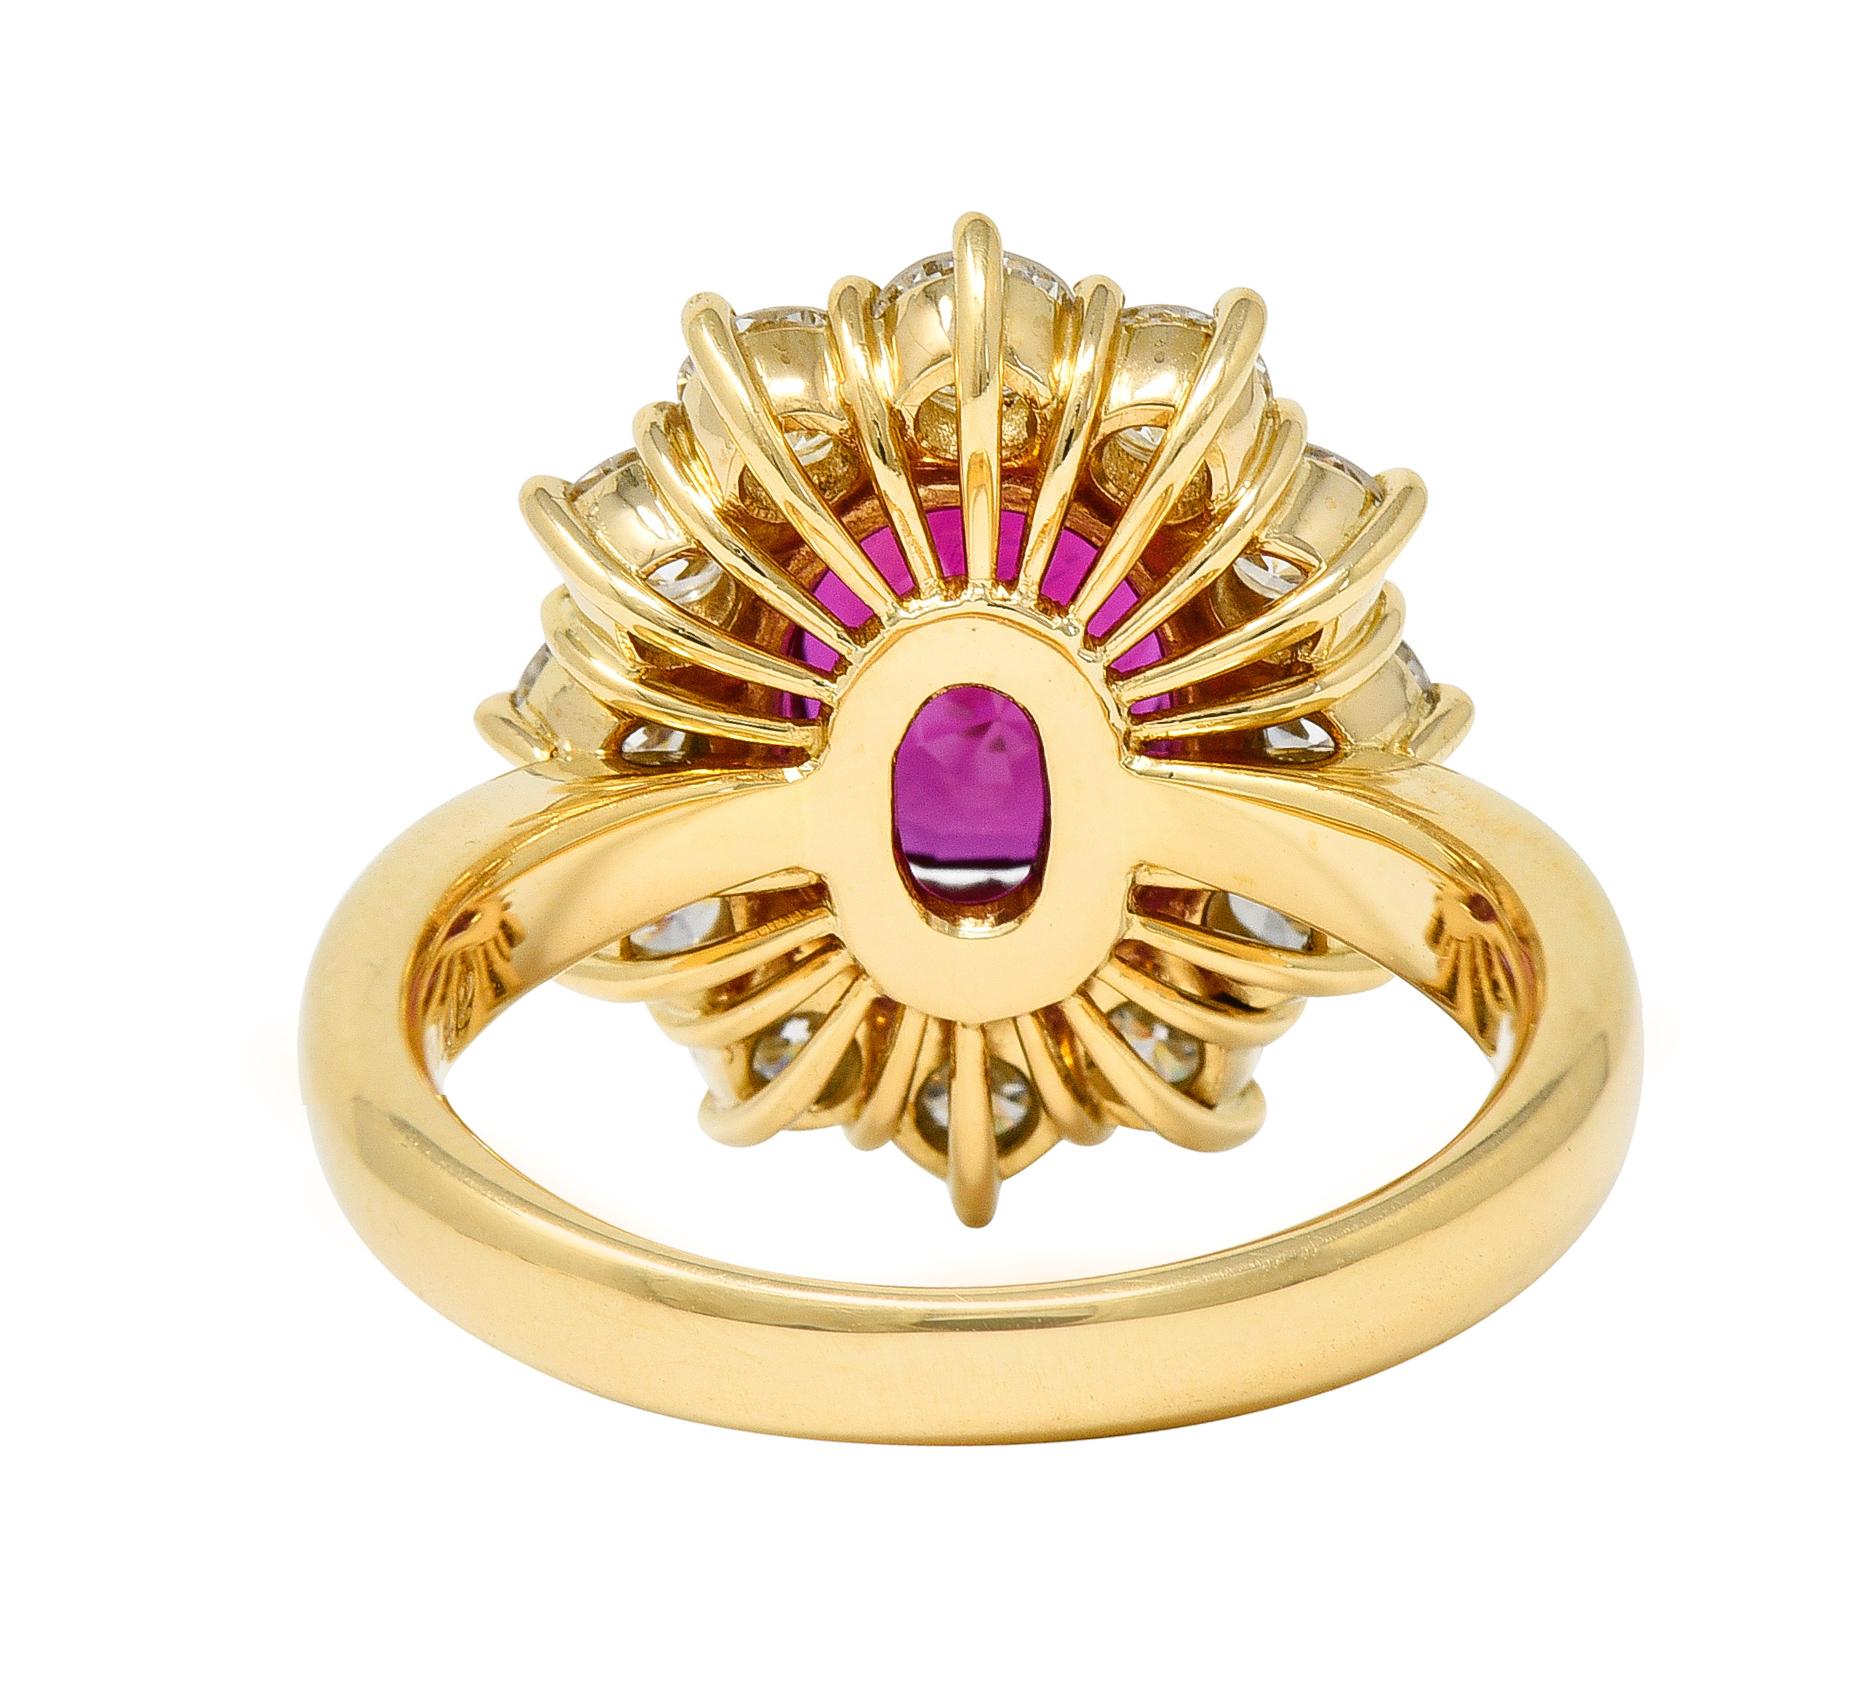 Contemporary 4.28 CTW Oval Step Cut Ruby Diamond 18 Karat Yellow Gold Ring In Excellent Condition For Sale In Philadelphia, PA